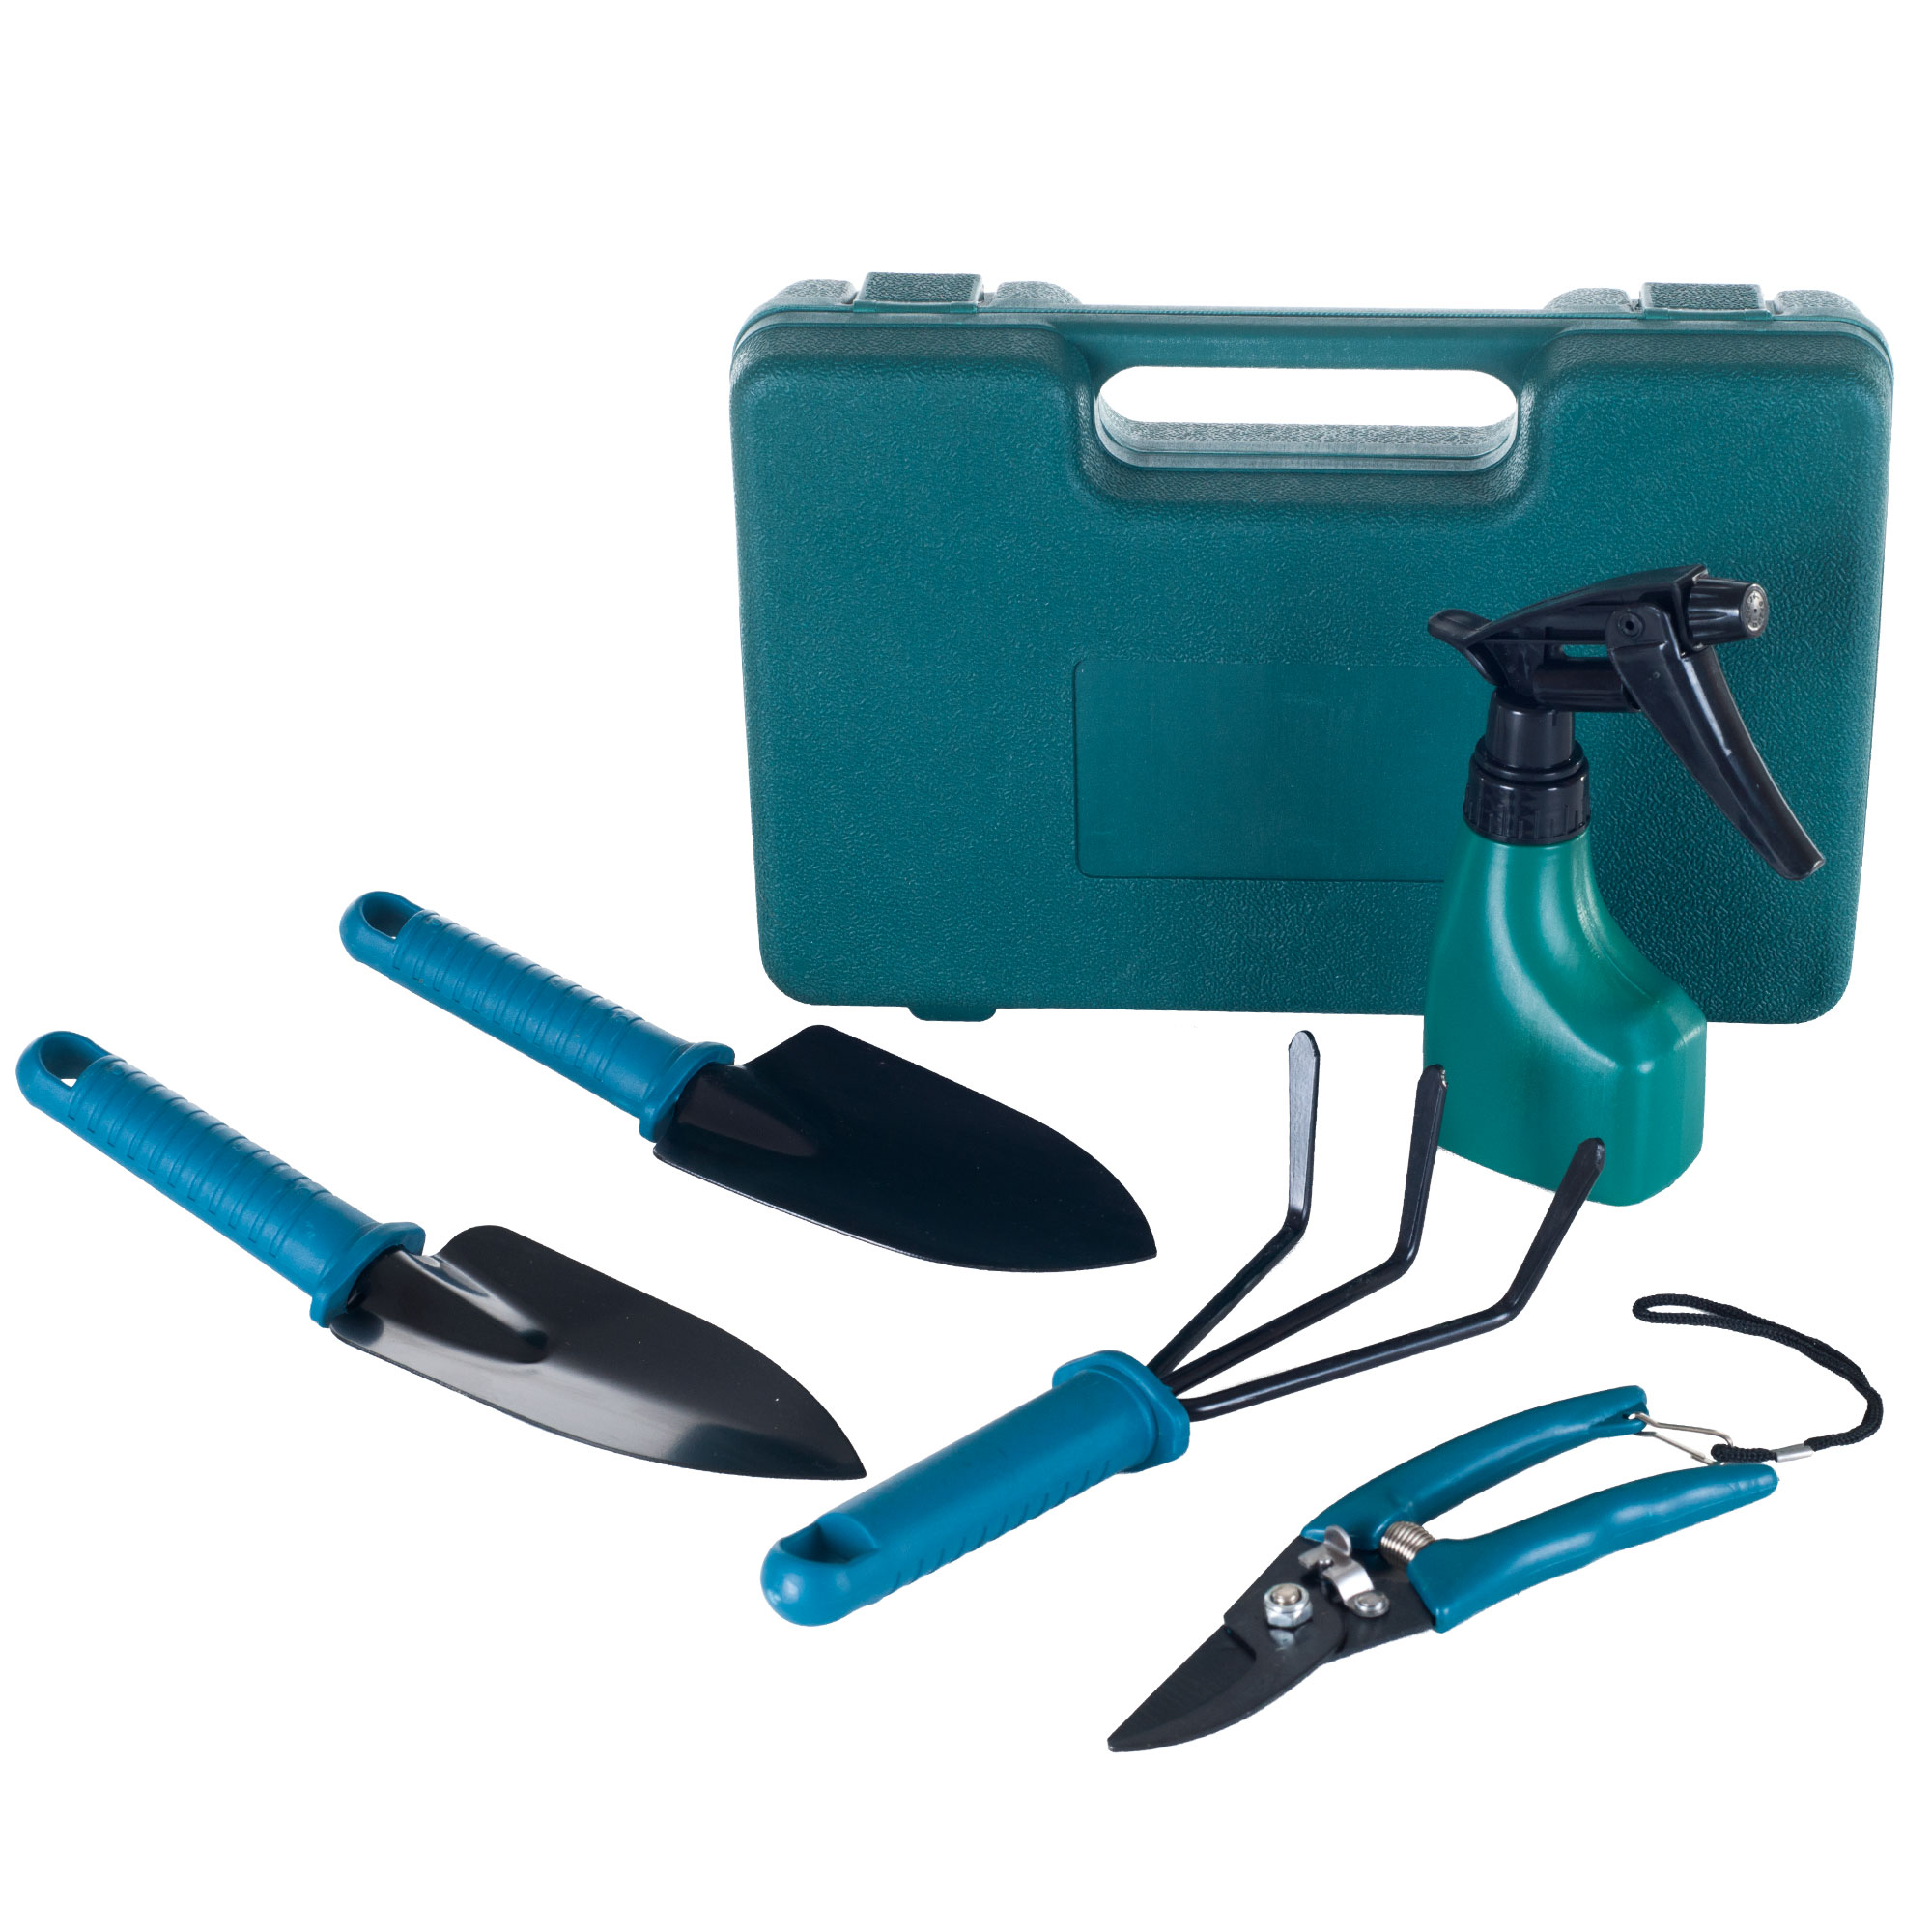 Stalwart 75-65931 6 Piece Garden Tool Set with Carrying Case